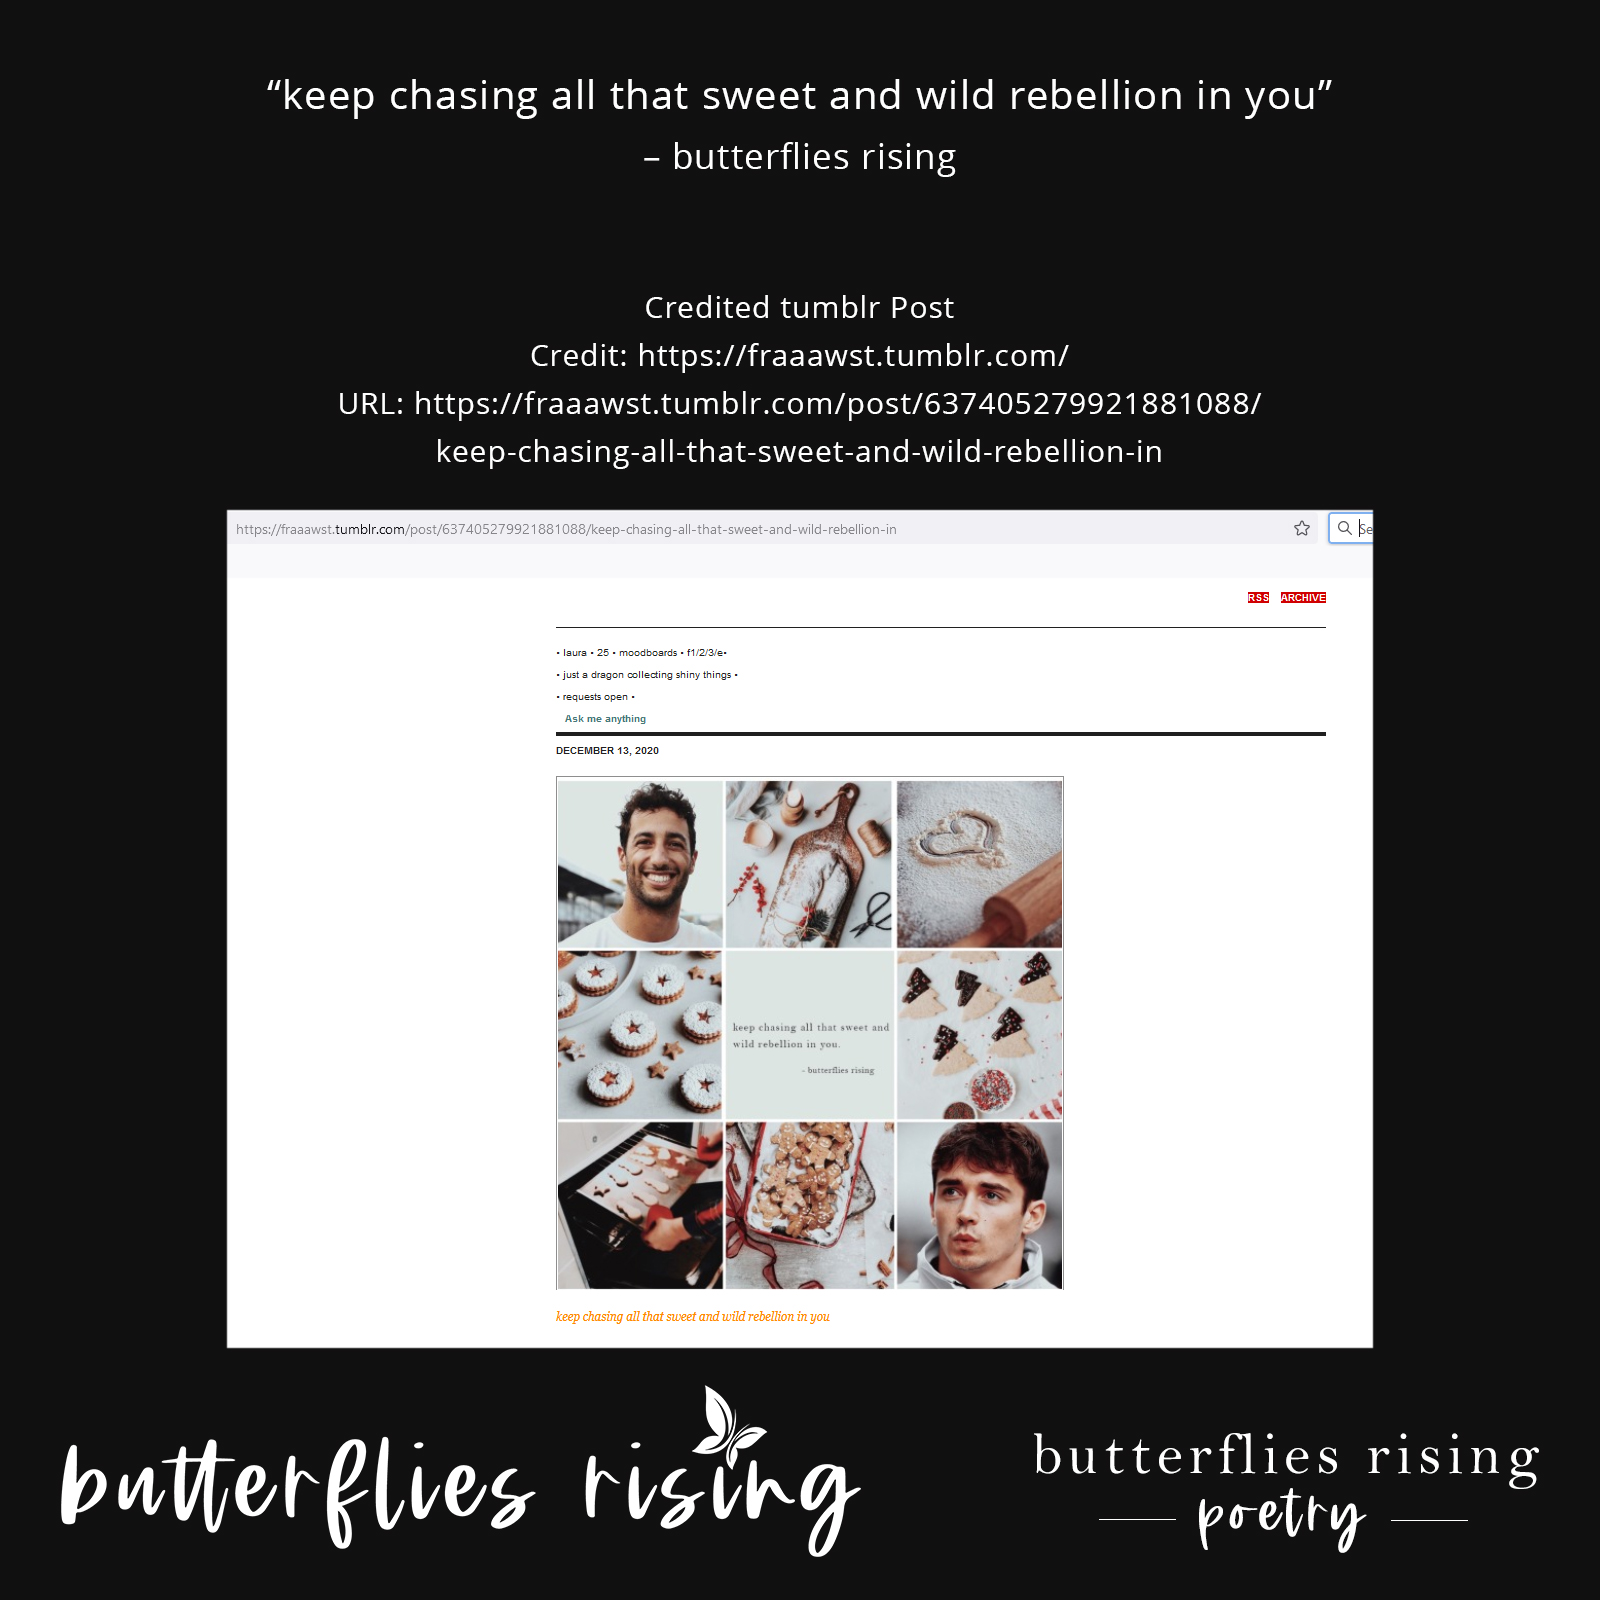 keep chasing all that sweet and wild rebellion in you - butterflies rising